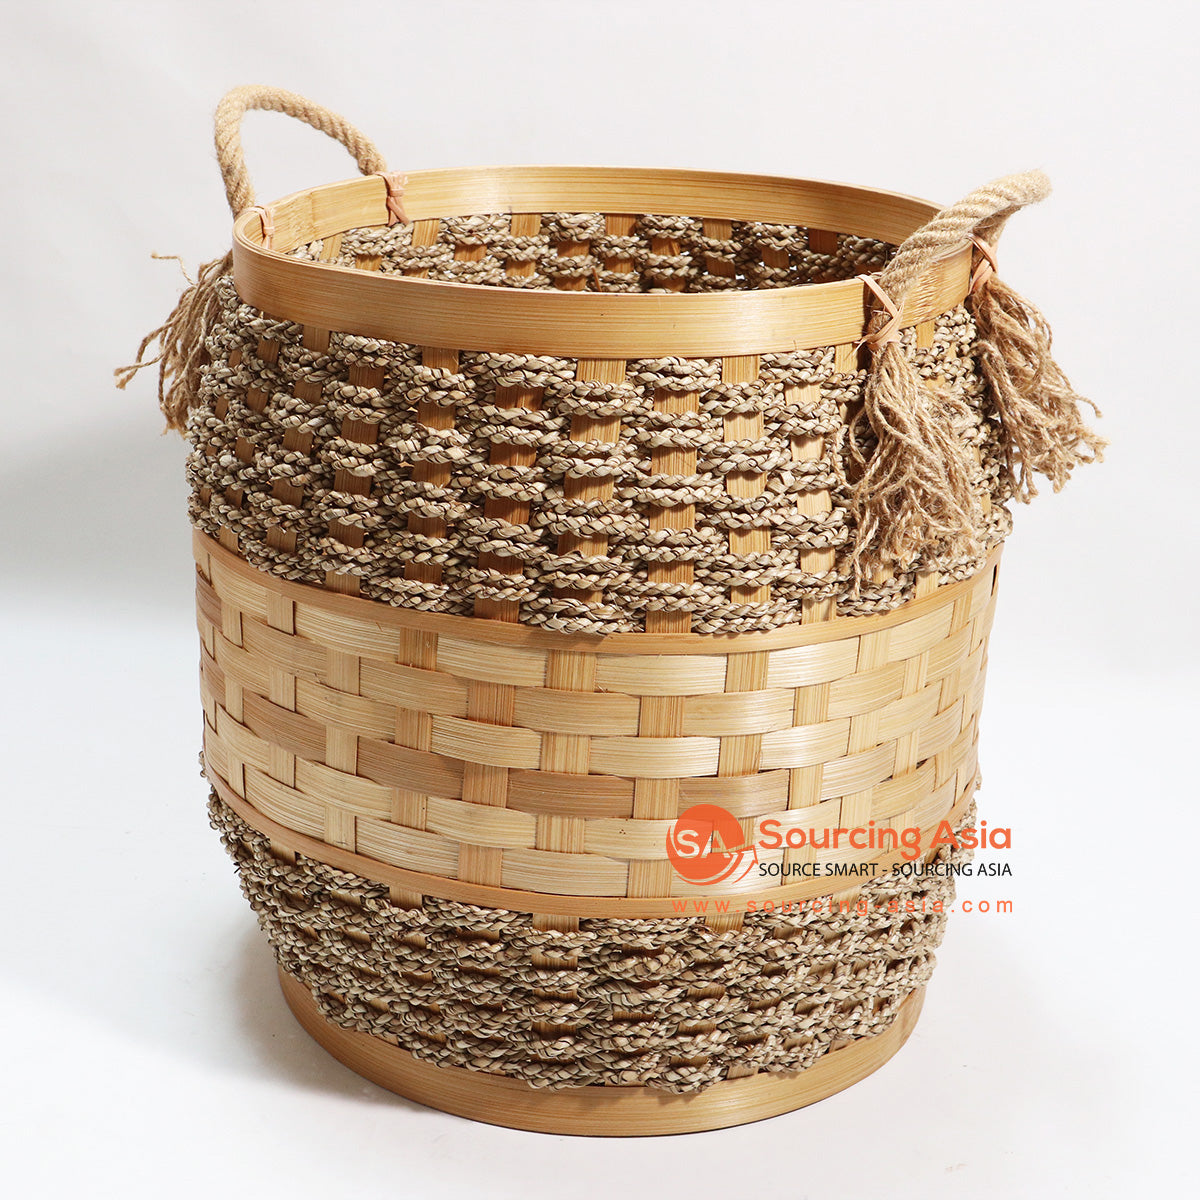 HBSC105 NATURAL BAMBOO AND SEAGRASS WOVEN BASKET